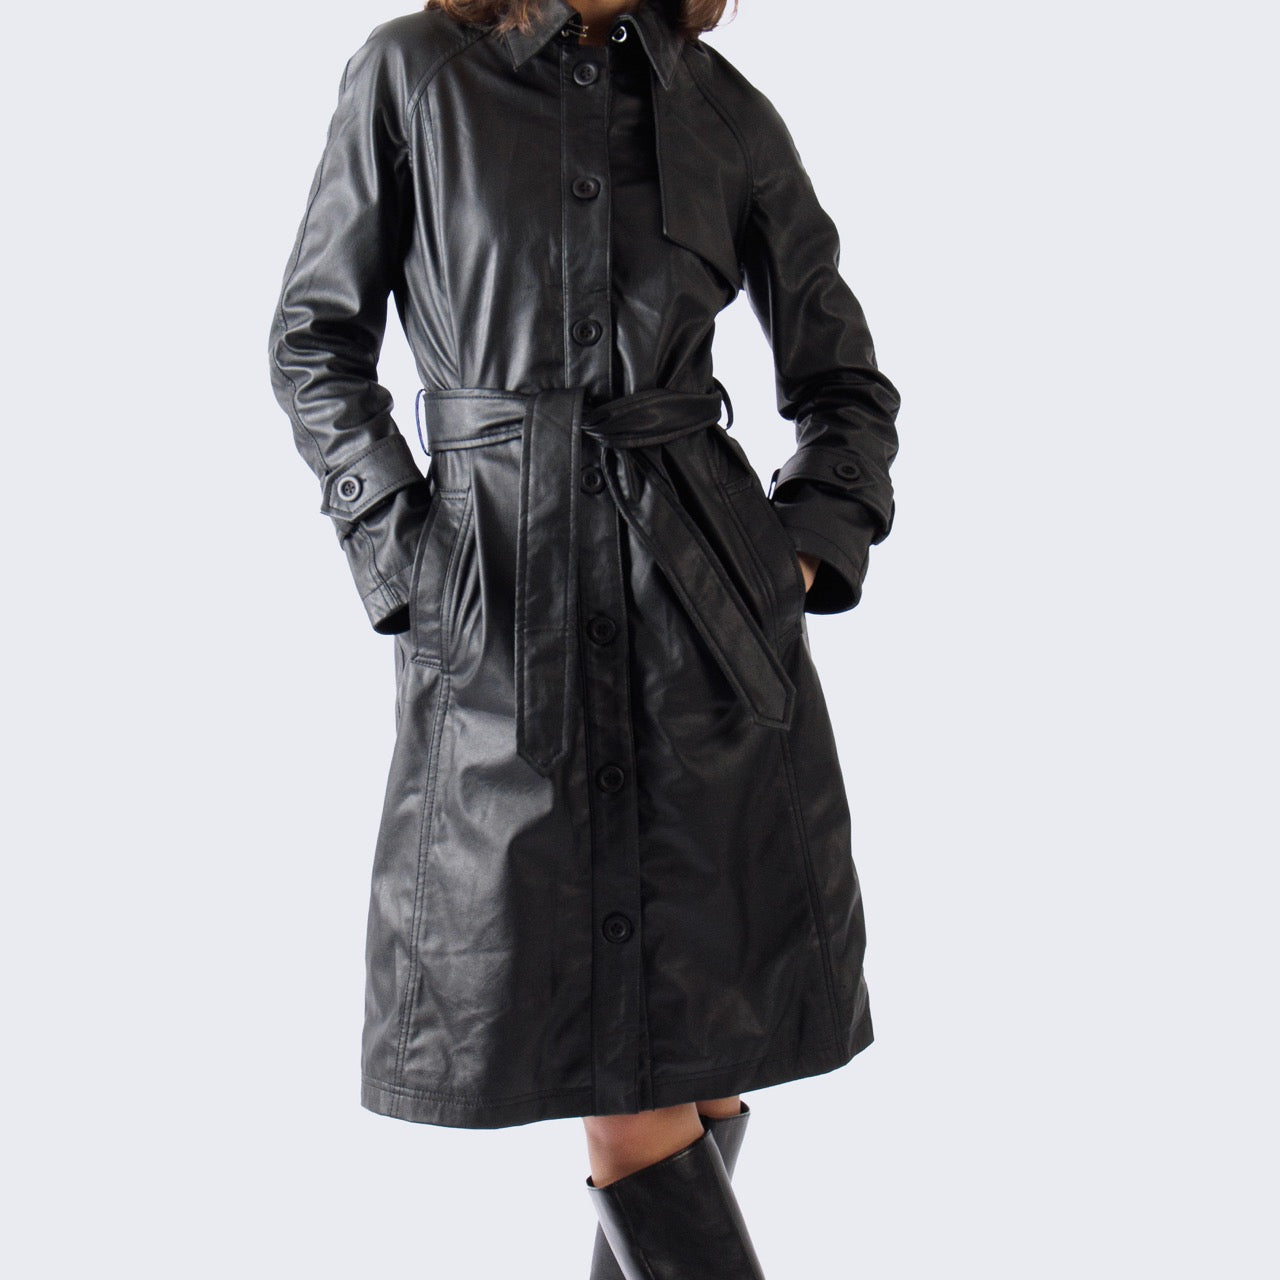 The Midnight Leather Trench Coat